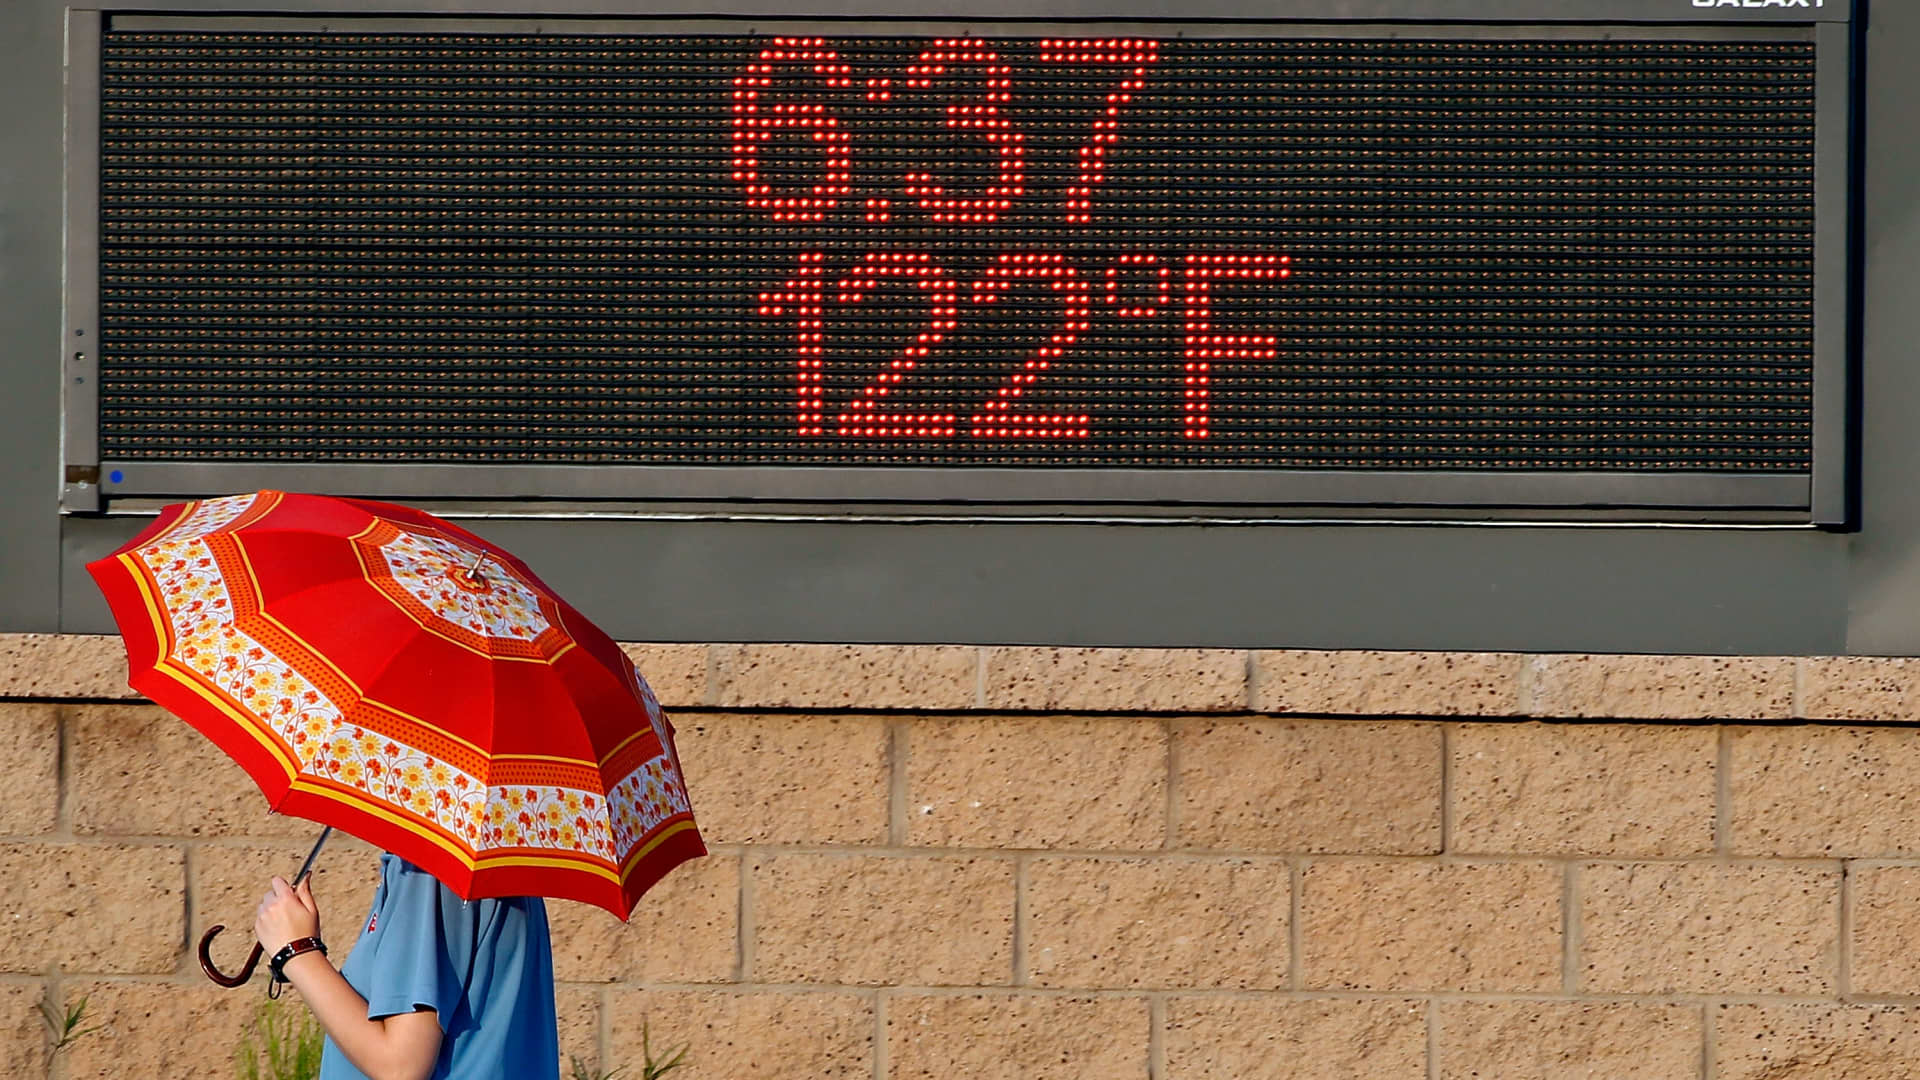 South, Midwest will see worst increases in extreme heat by 2053